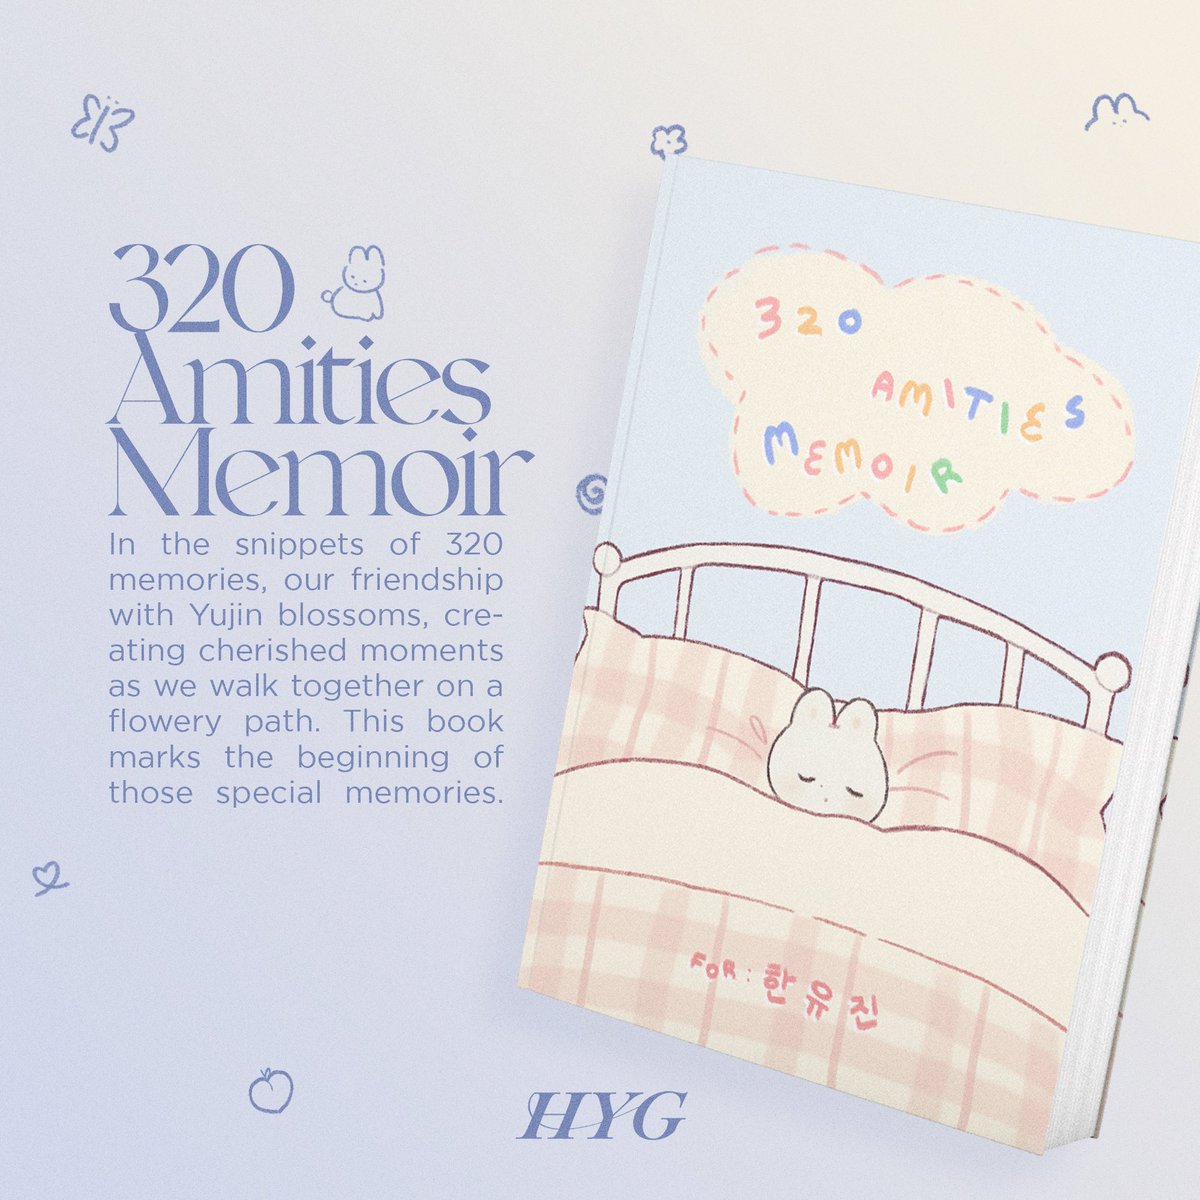 🍑 320 AMITIES MEMOIR FOR #HANYUJIN 💌

‘This book marks the beginning of our special memories.’

Uncover cherished memories as Yujin embarks on a mesmerizing journey with ZEROSE within these book’s pages. Here’s the captivating cover reveal!

#AMITIESOFHYJ #한유진 #ZEROBASEONE